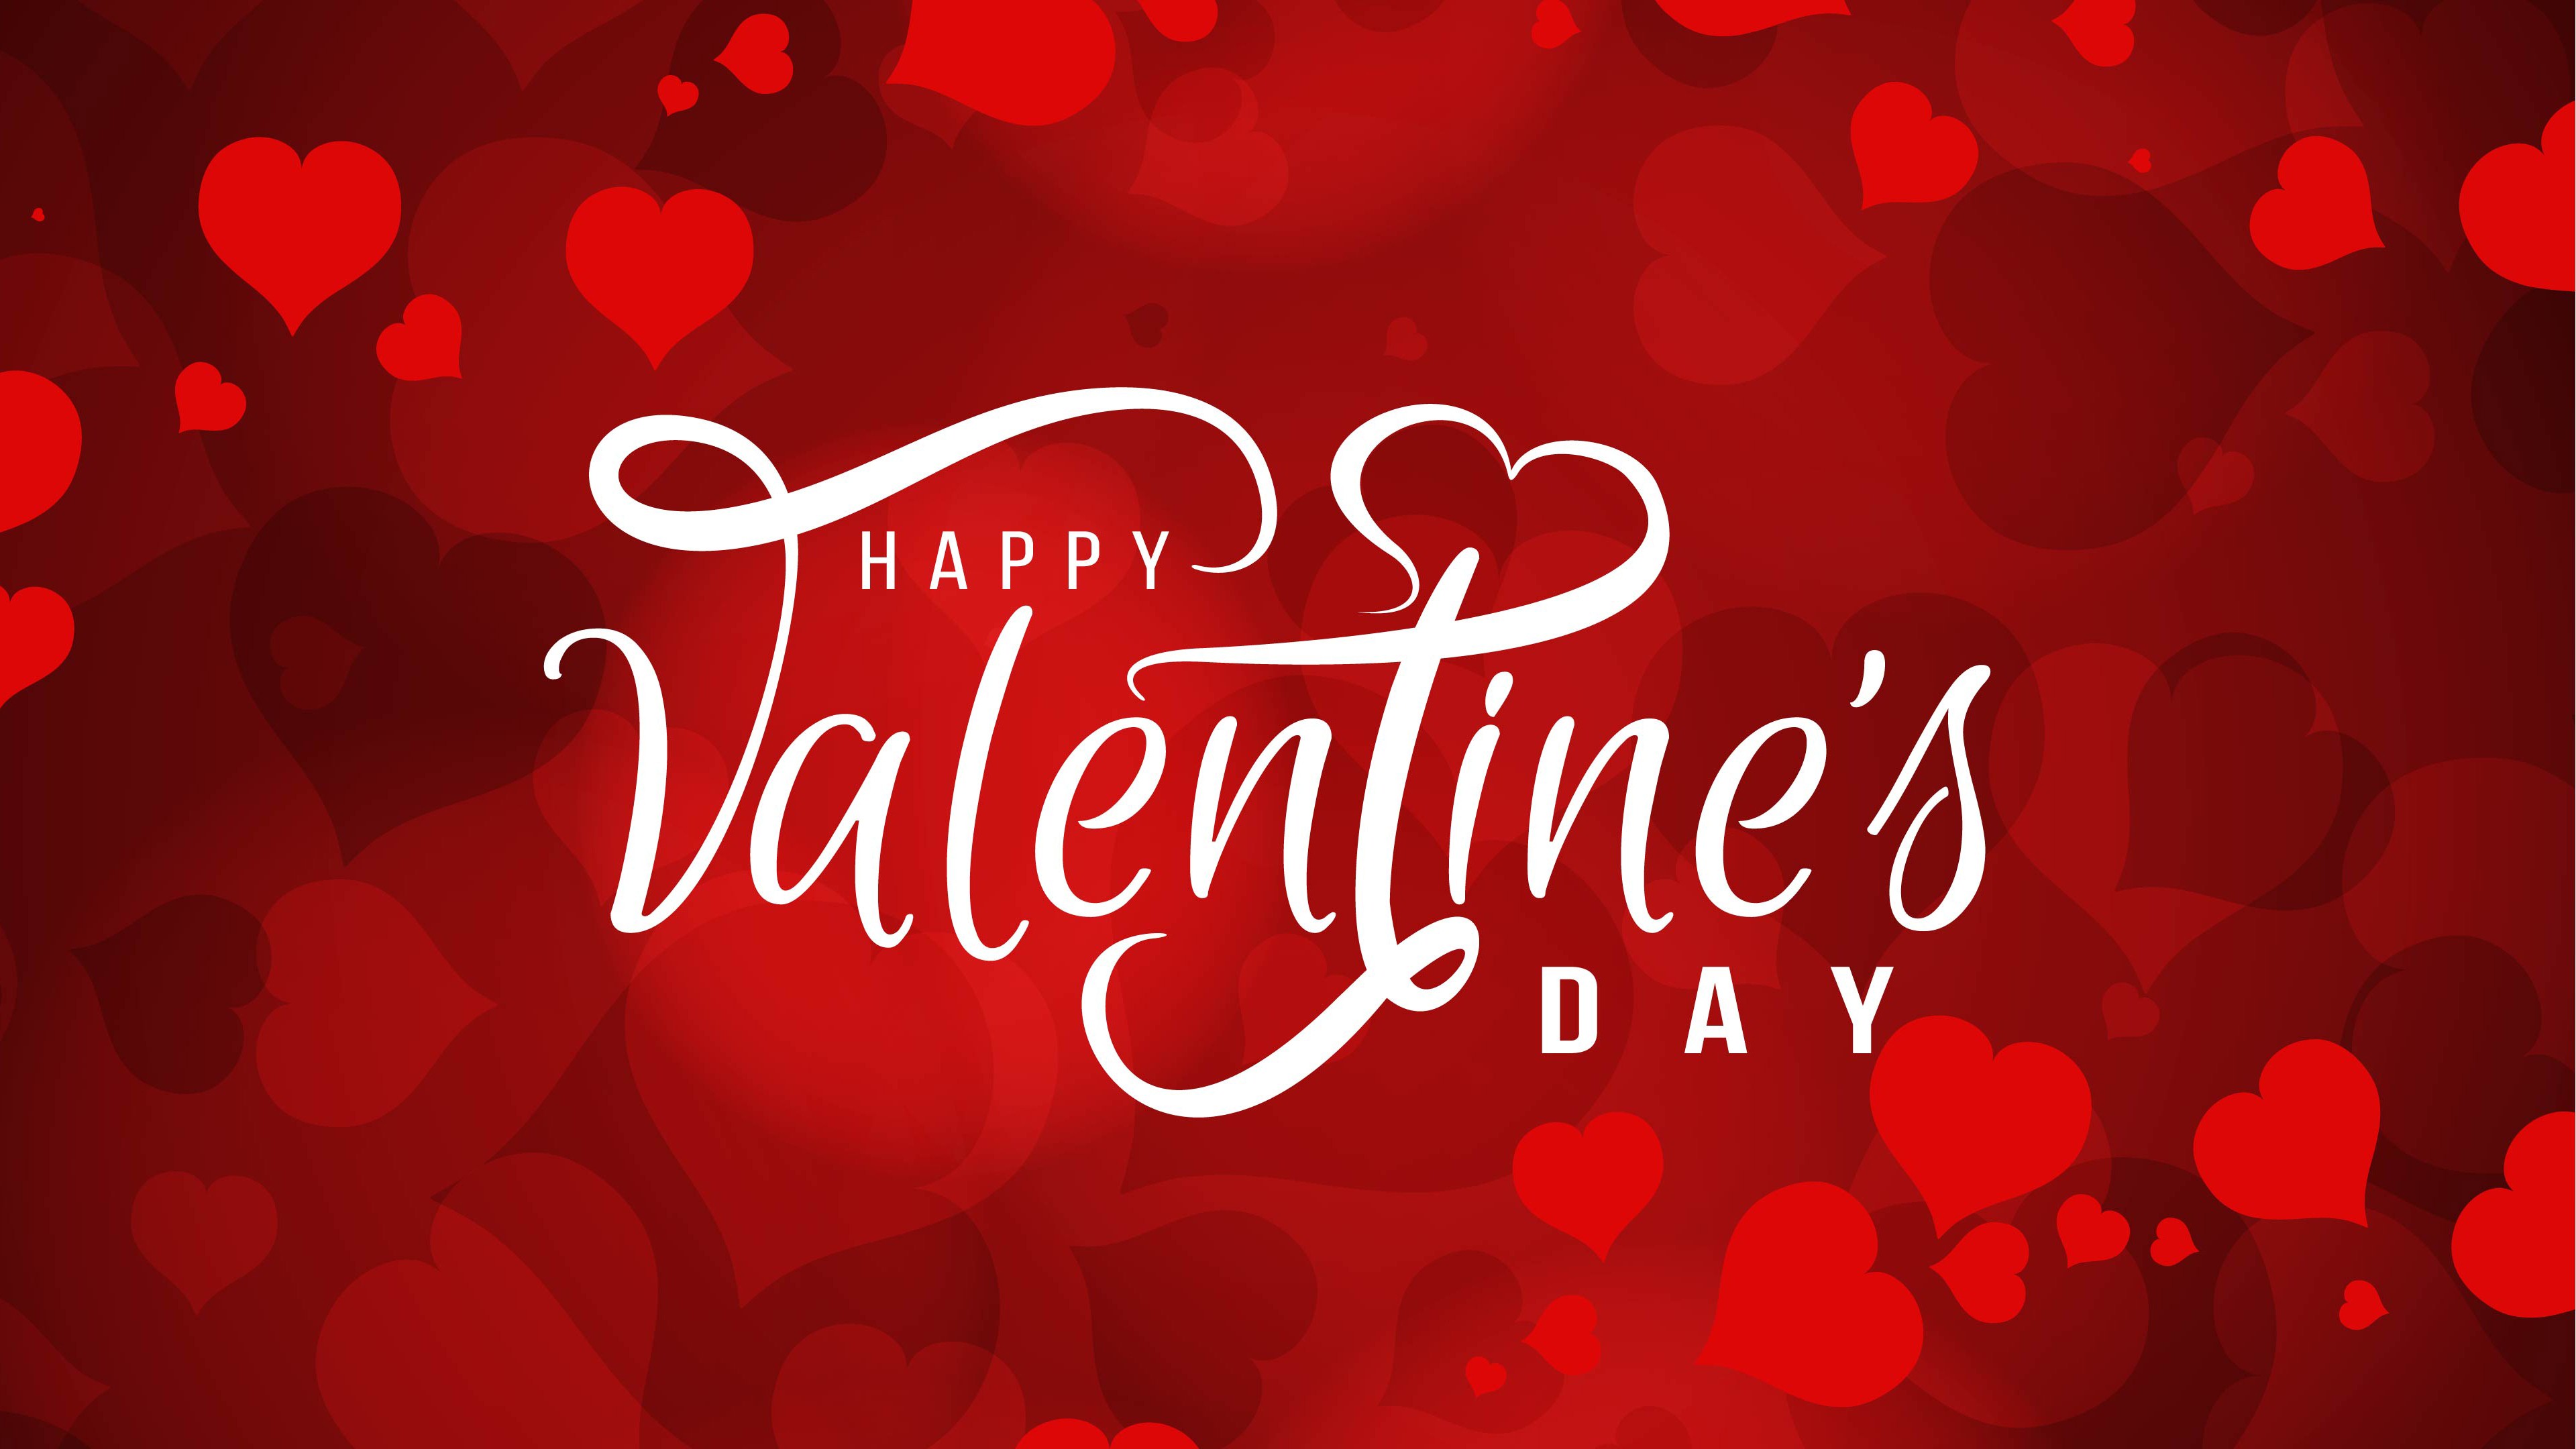 valentines day wallpaper,font,text,red,valentine's day,heart